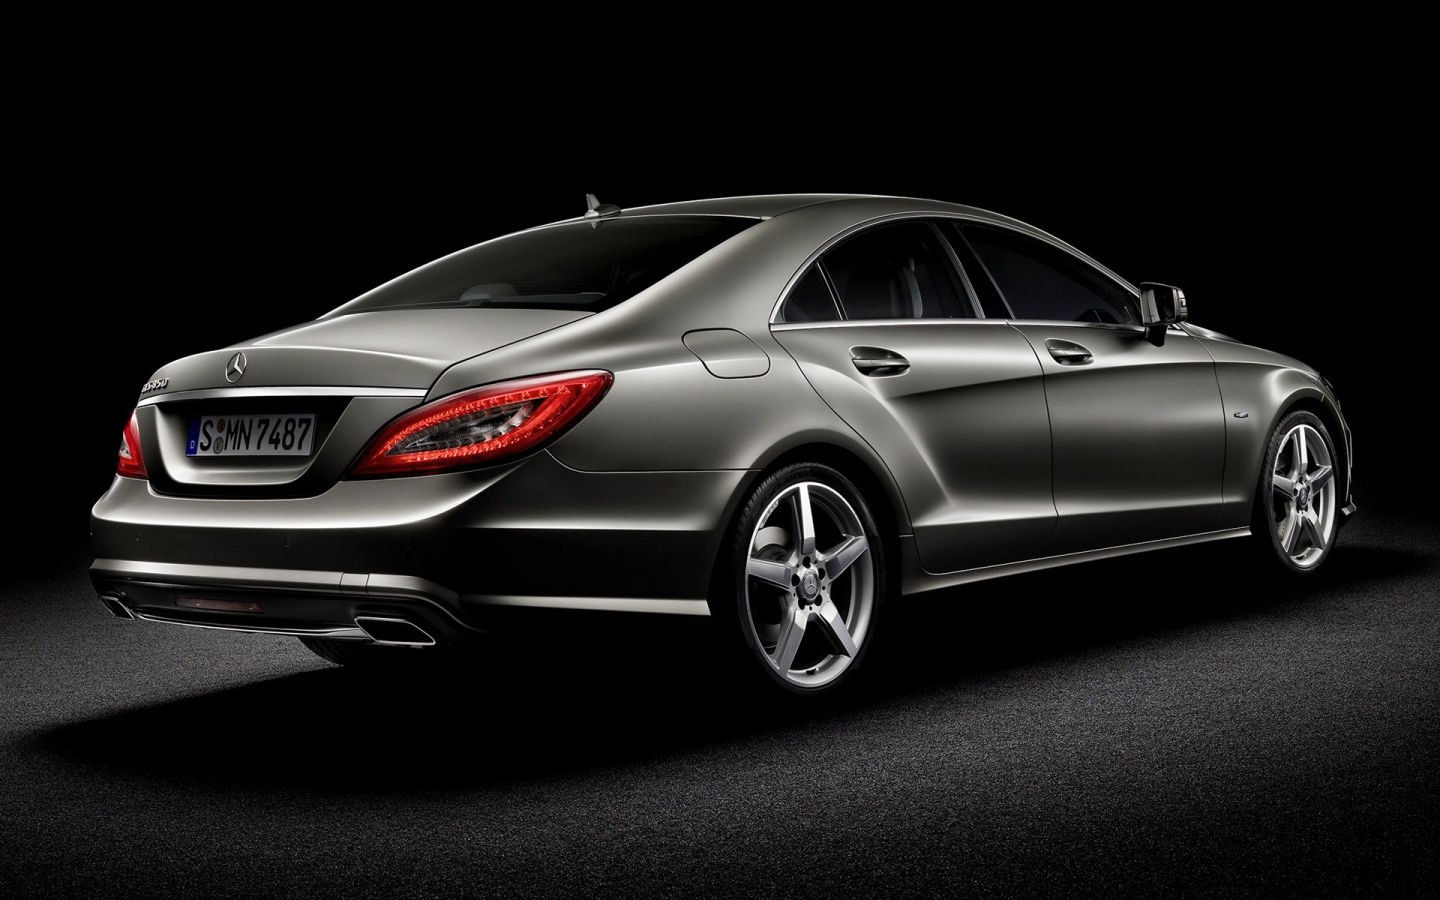 Mercedes CLS 2010 Rear for 1440 x 900 widescreen resolution